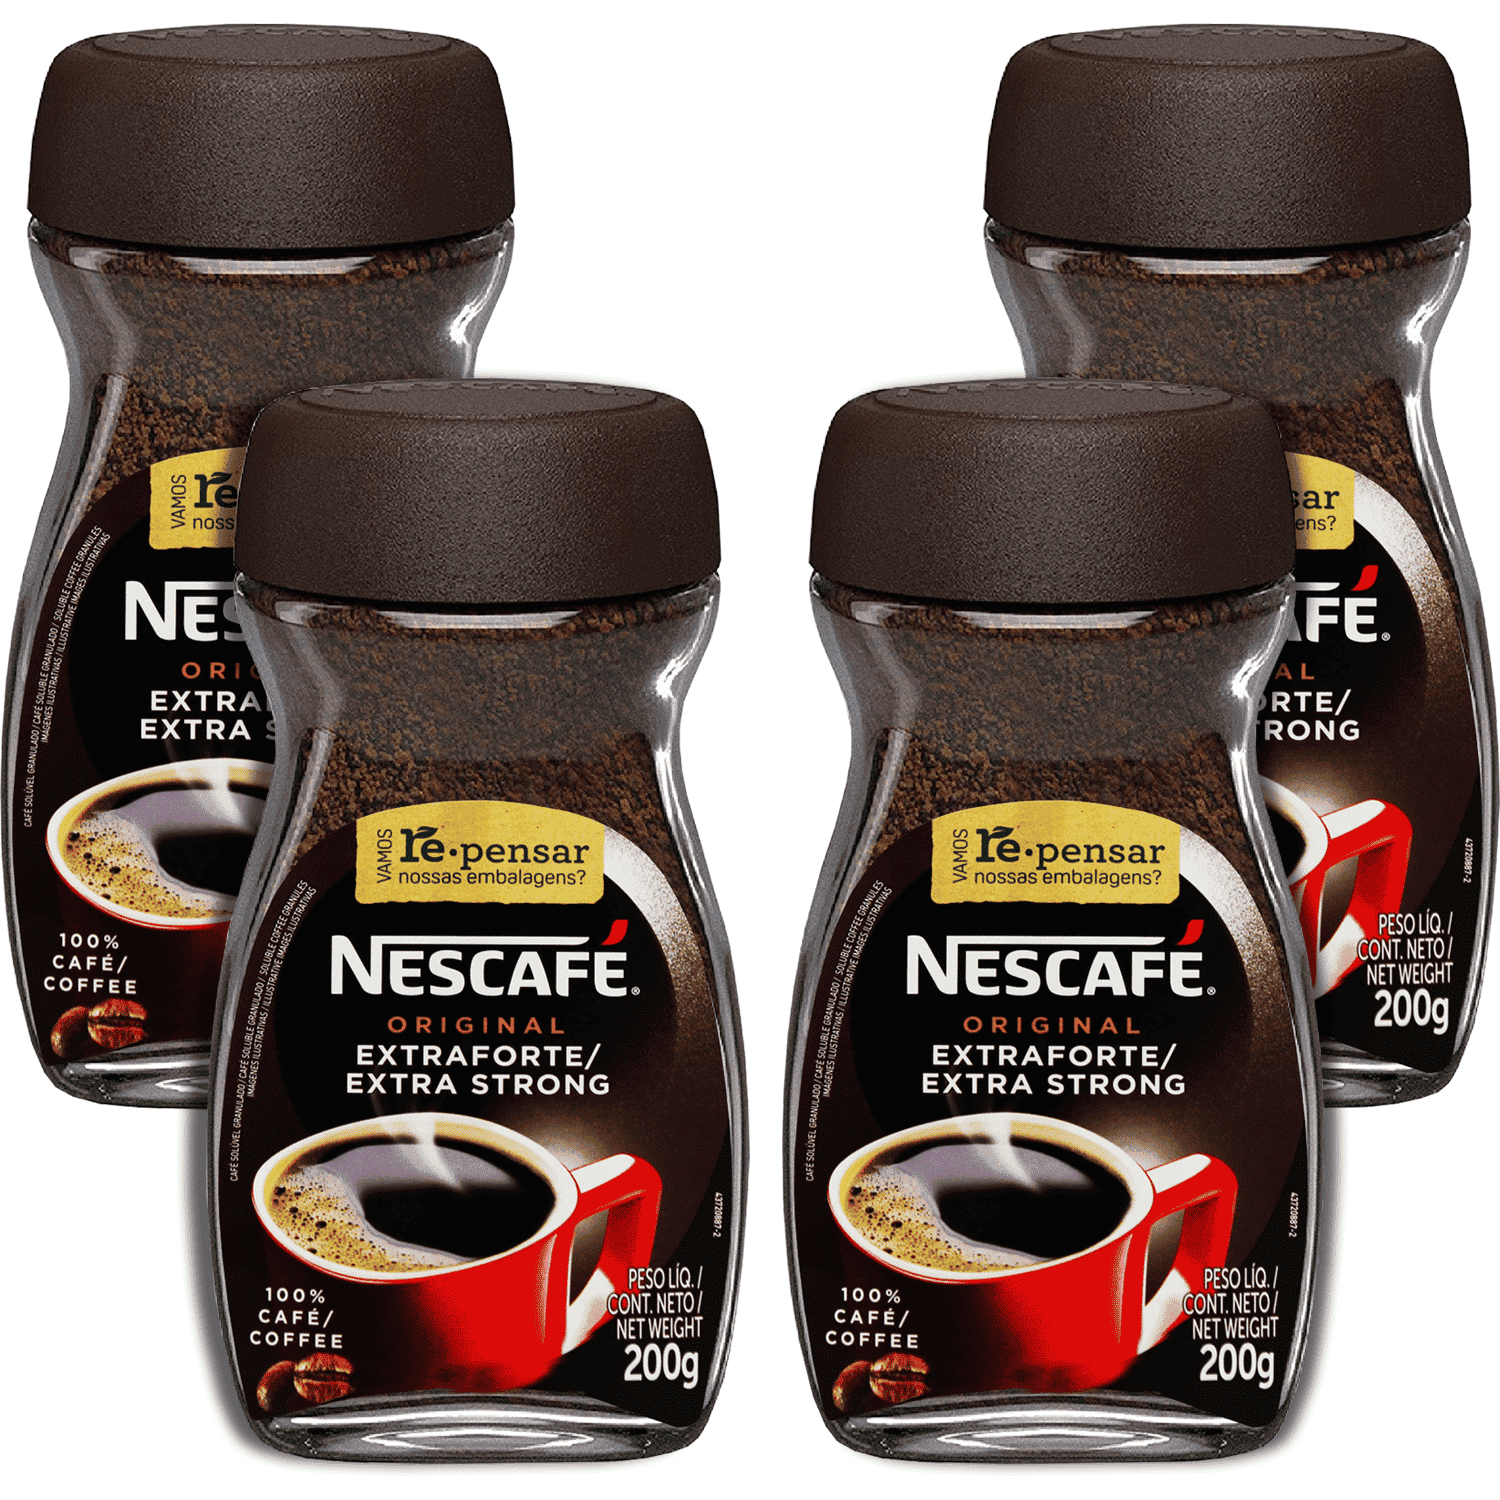 NESCAFE Extra Strong Instant Coffee 7 Ounce/200g (Pack of 4), Bulk ...